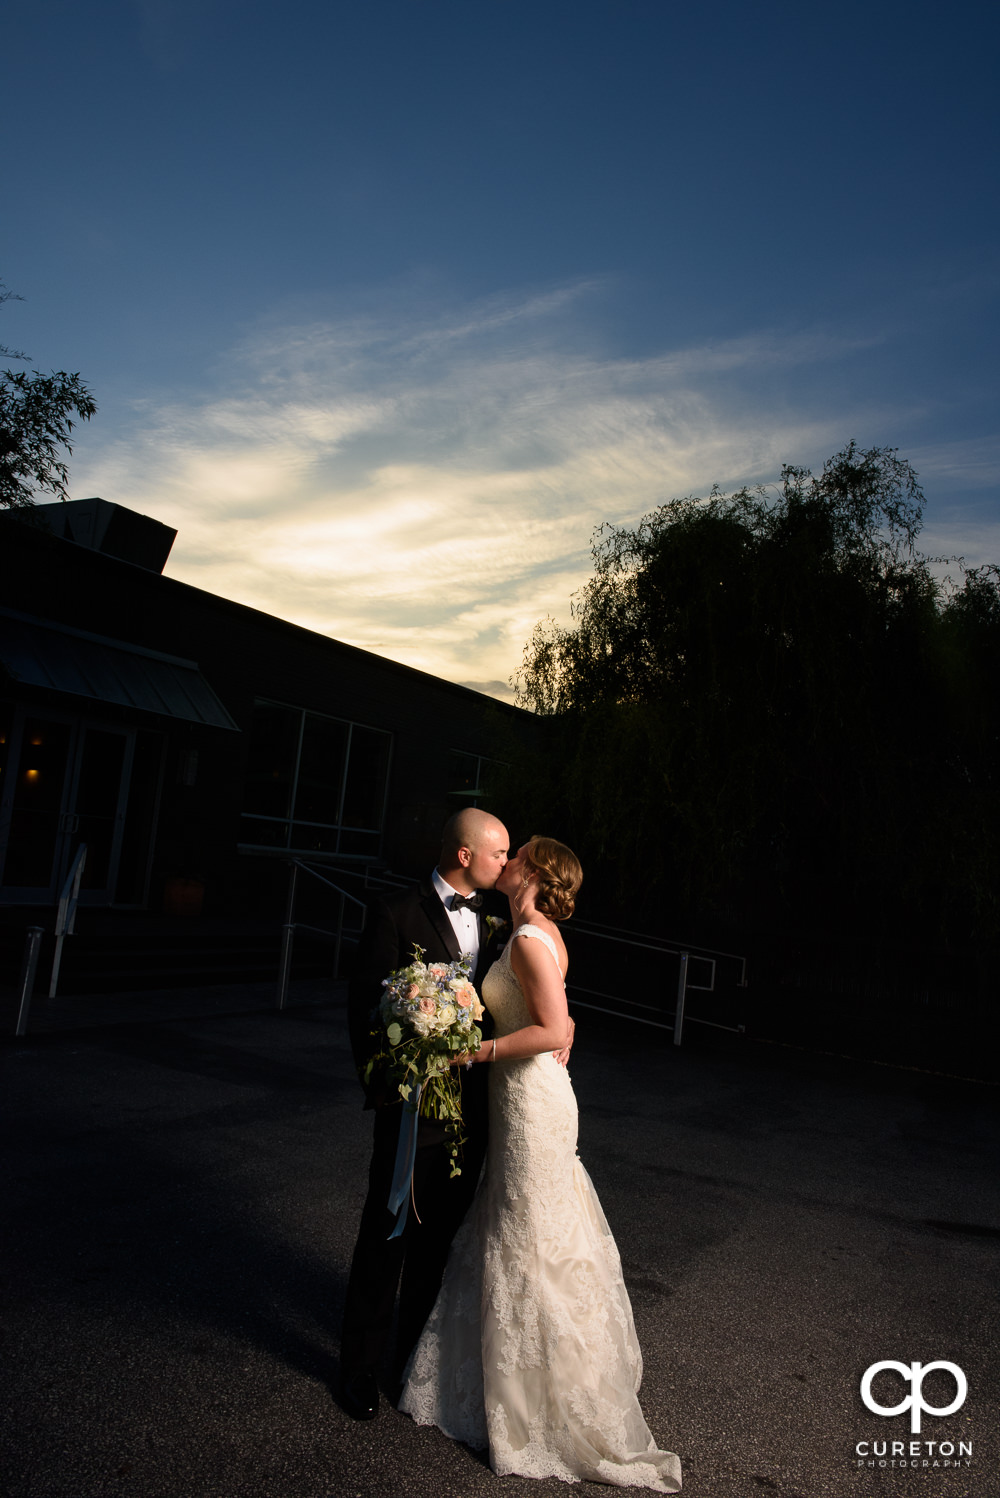 Bride and groom kissing at sunset during their wedding reception at Zen Greenville.